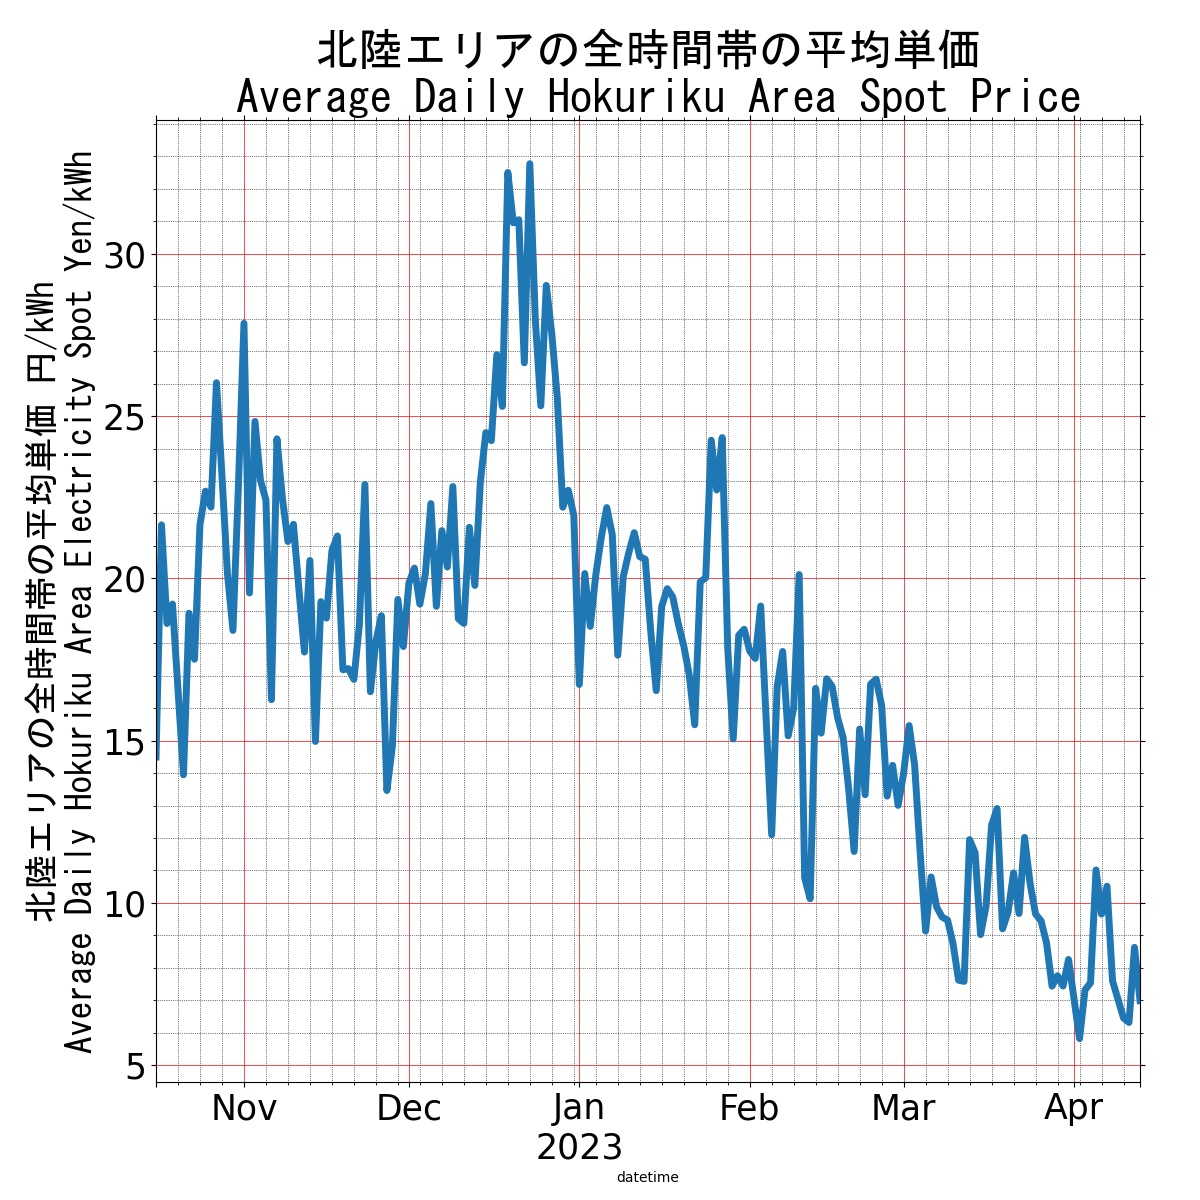 Japanese Electricity JEPX Hokuriku Area Price plotted over time for the last 90 days